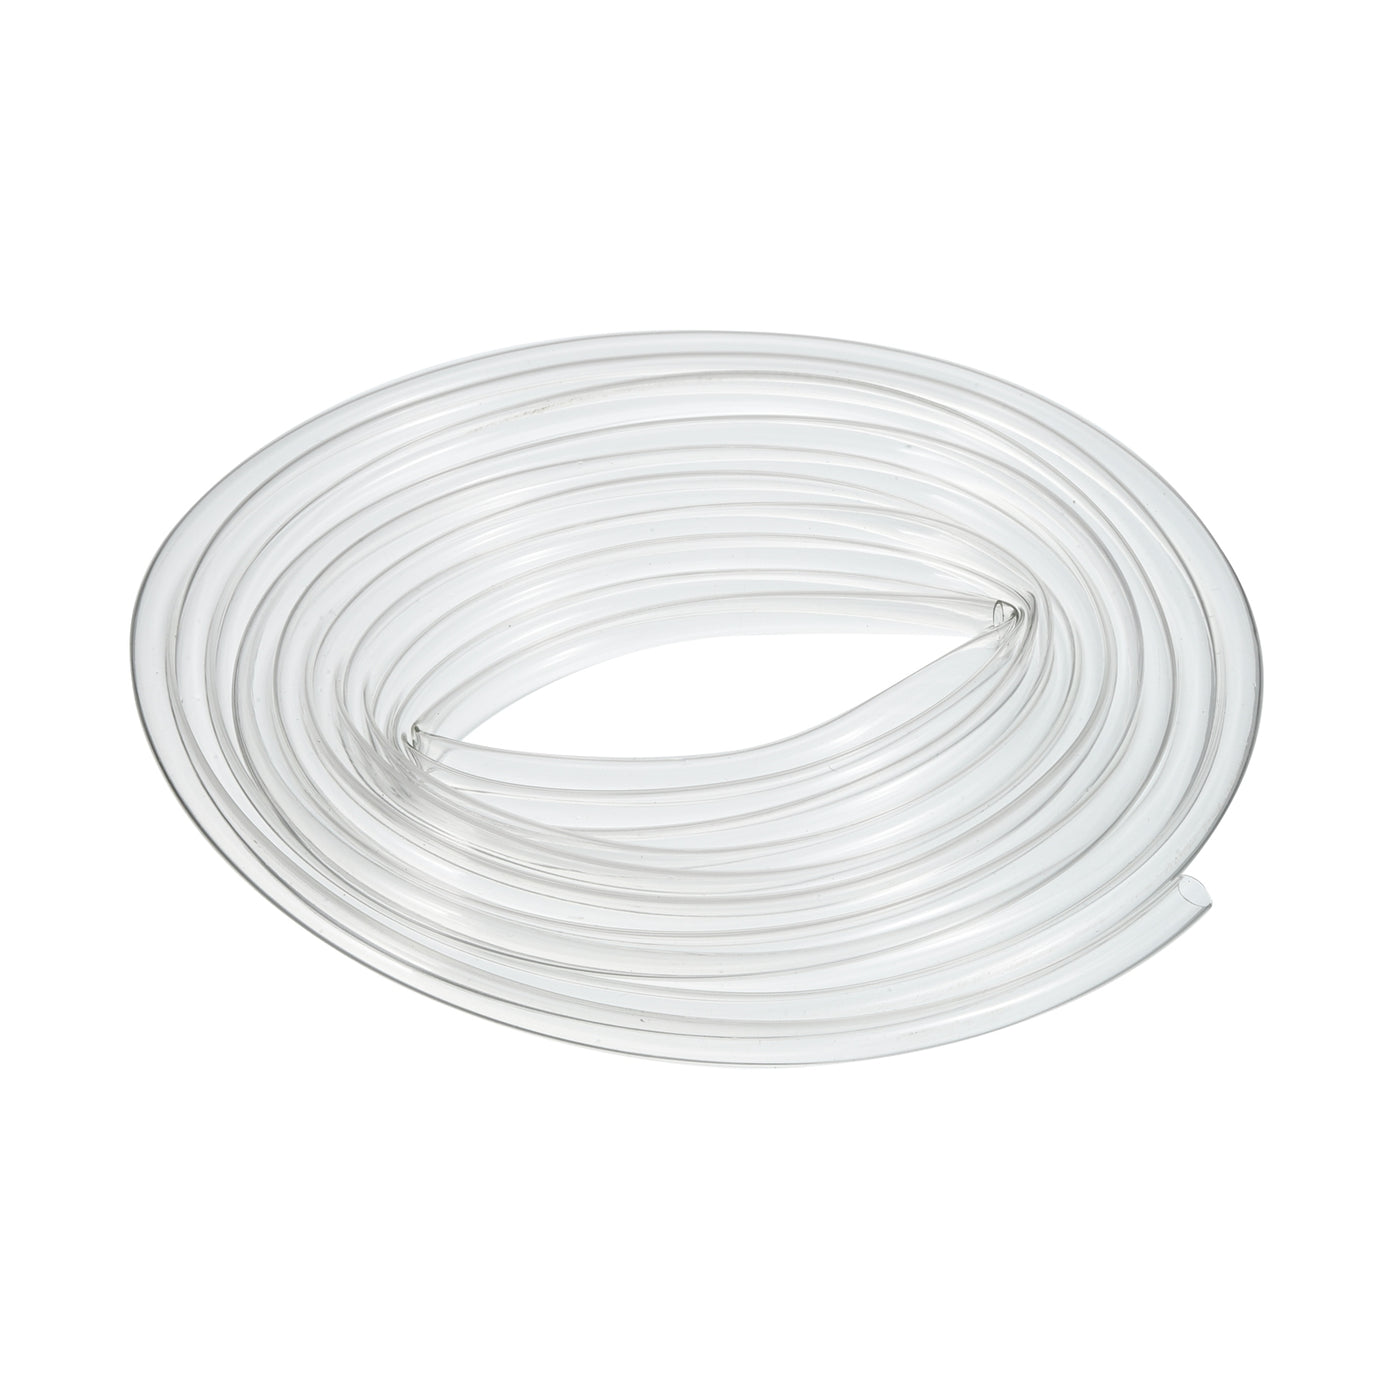 uxcell Uxcell Clear PVC Tube Wire Harness Tubing, 3/16-inch(5mm) ID 10ft Sleeve for Wire Sheathing Wire Protection